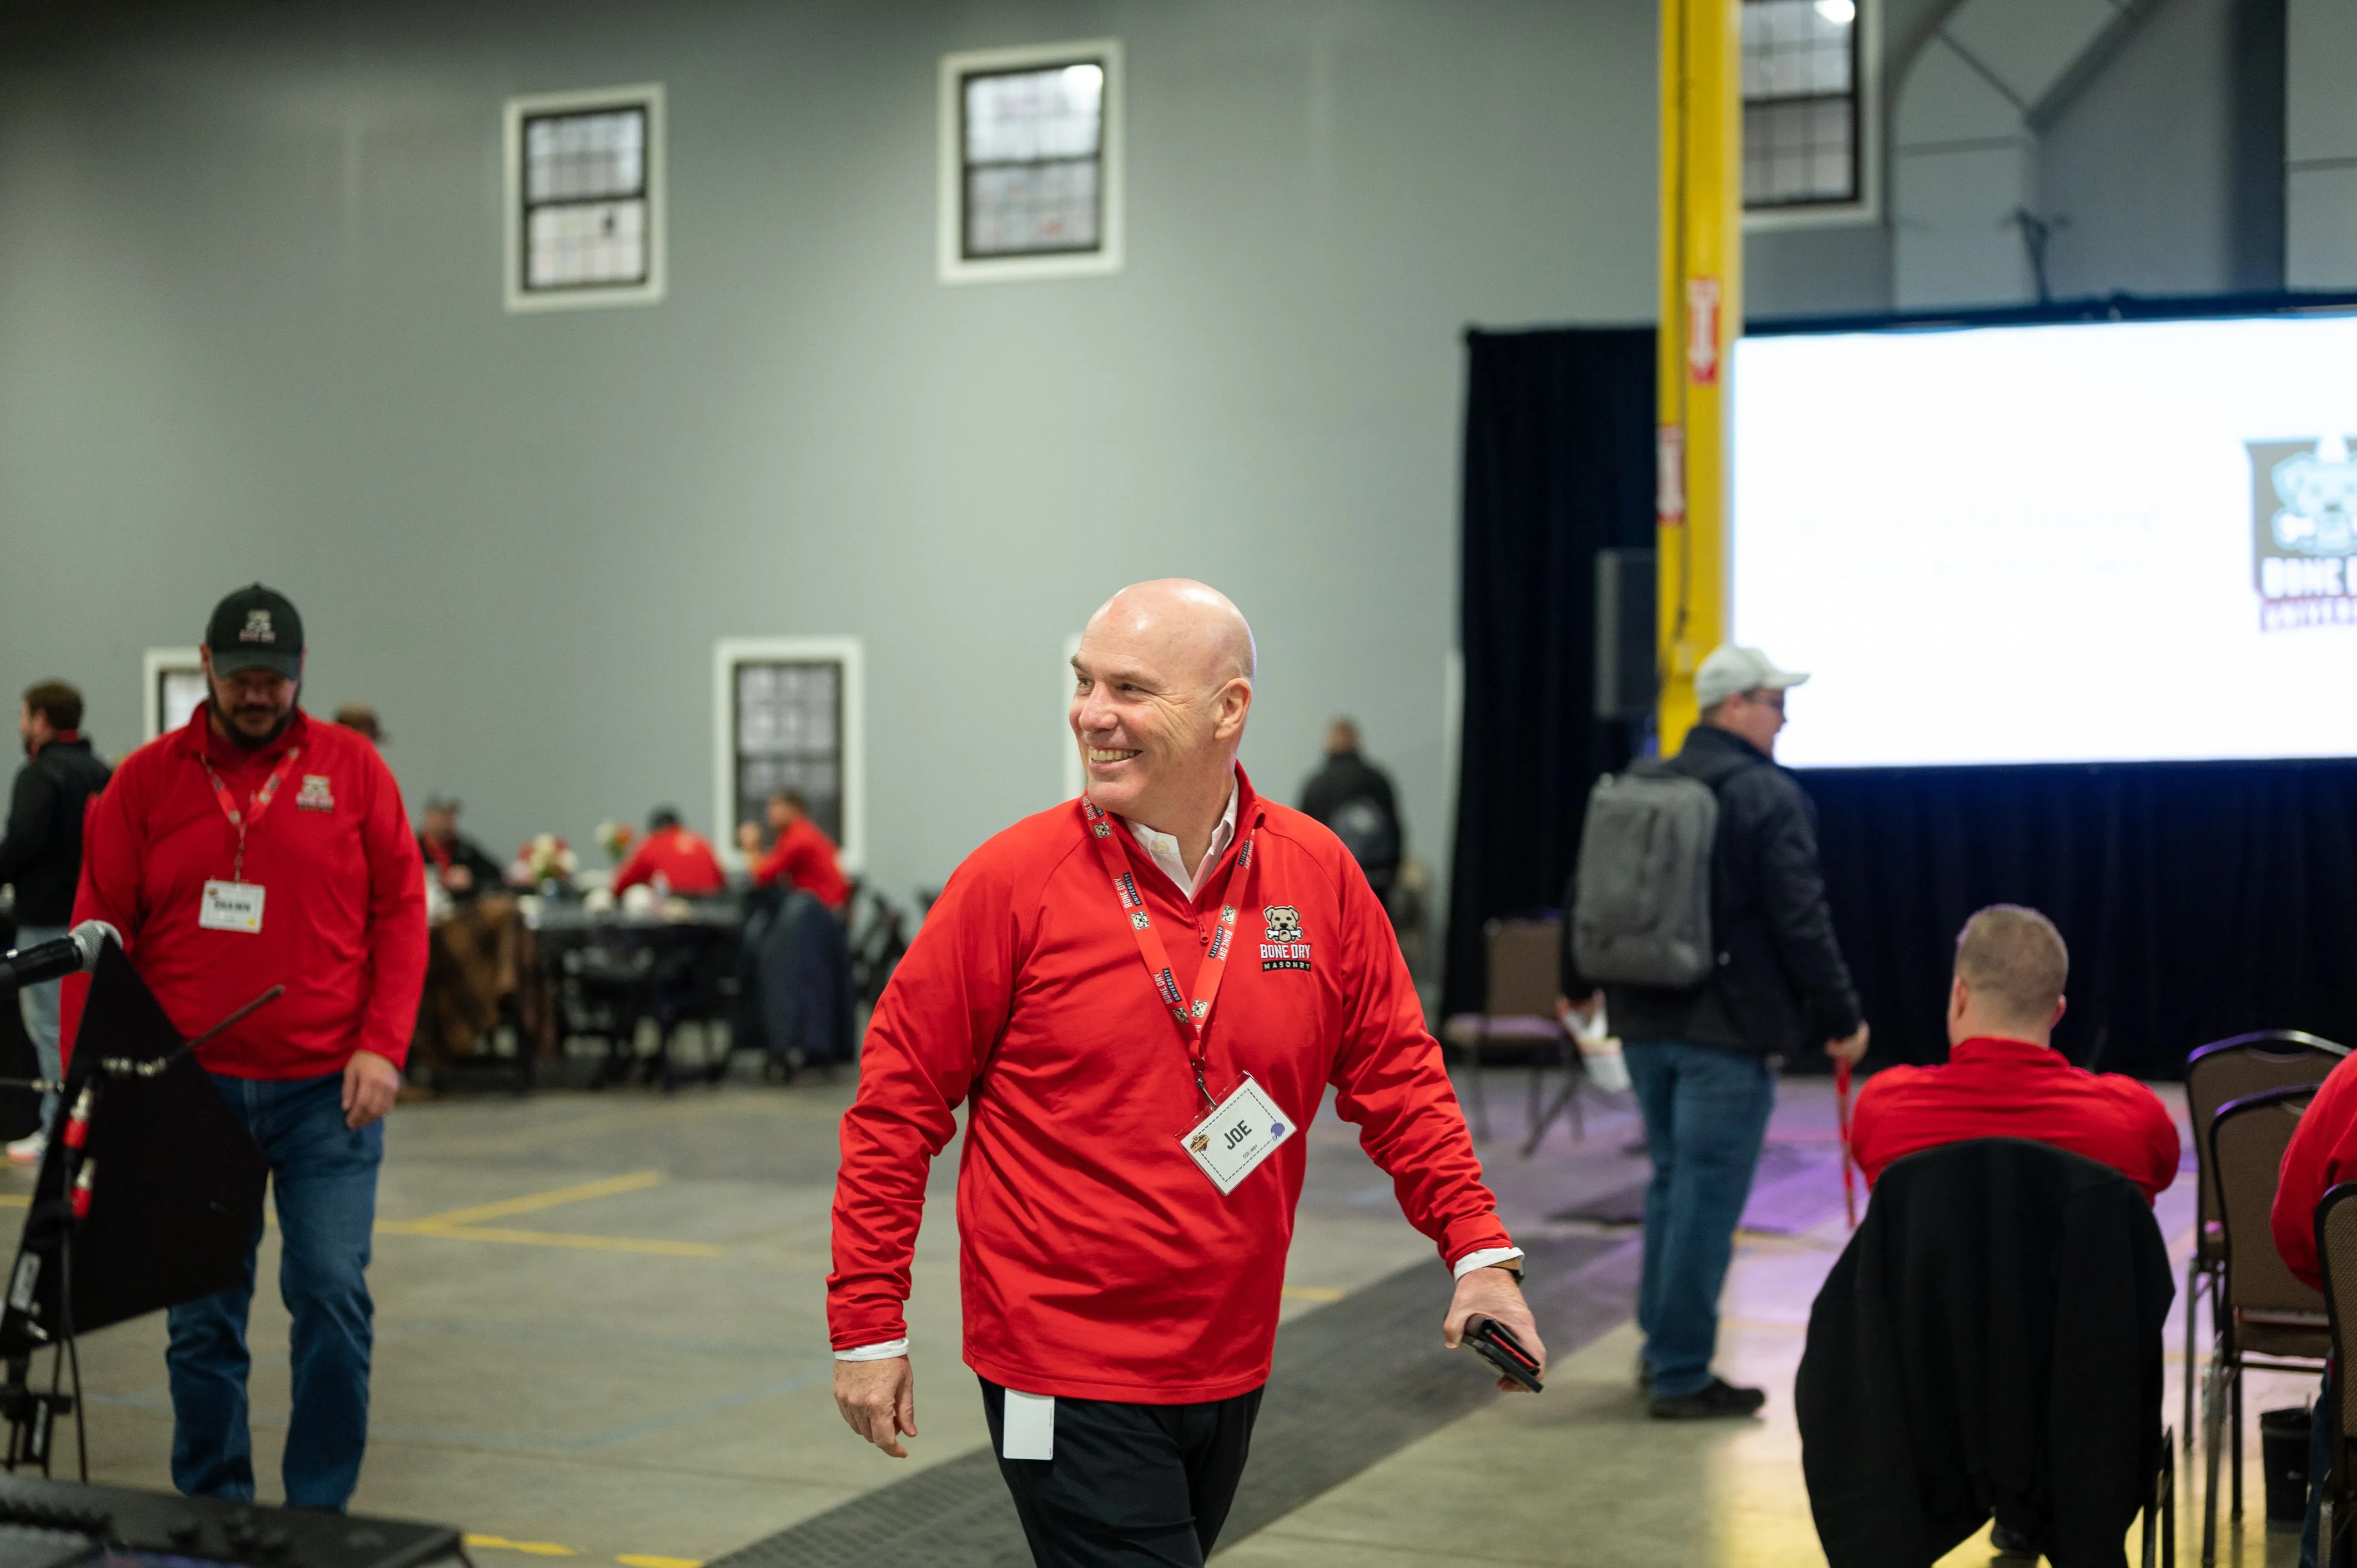 A man in a red jacket walking through a convention center with other attendees in the background.